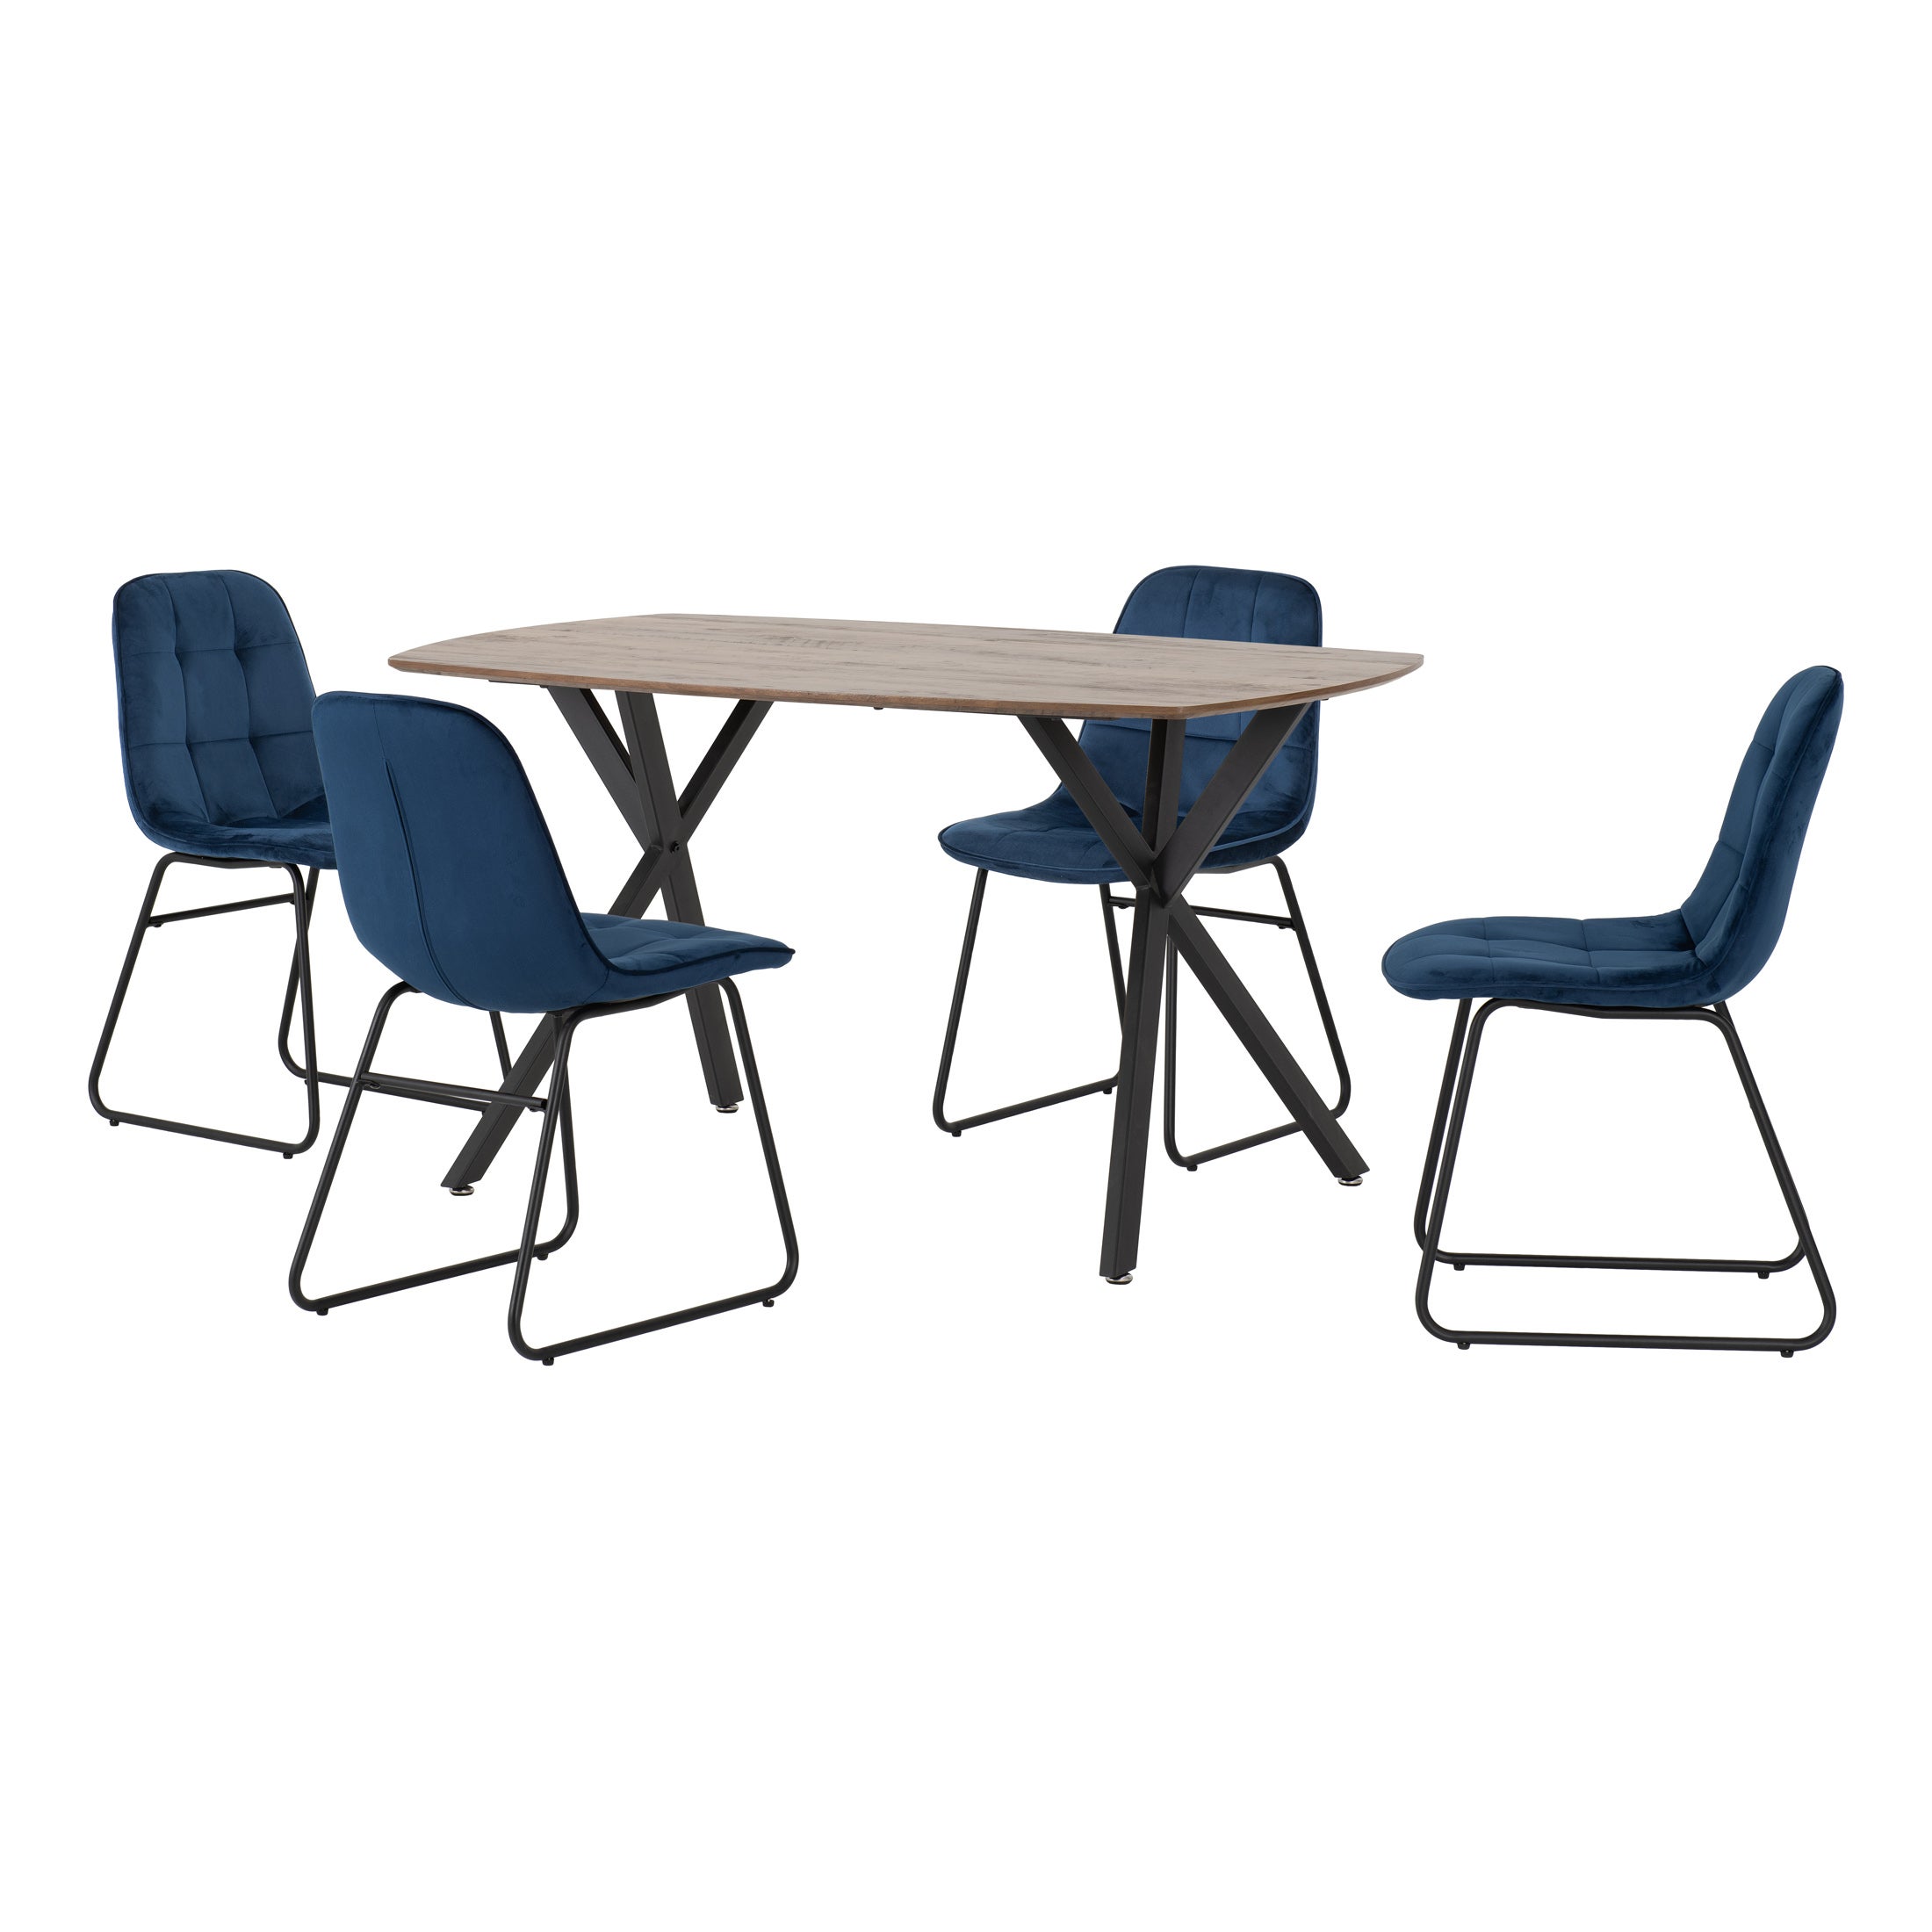 Athens Rectangular Dining Table with 4 Lukas Chairs, Oak Effect Navy Blue